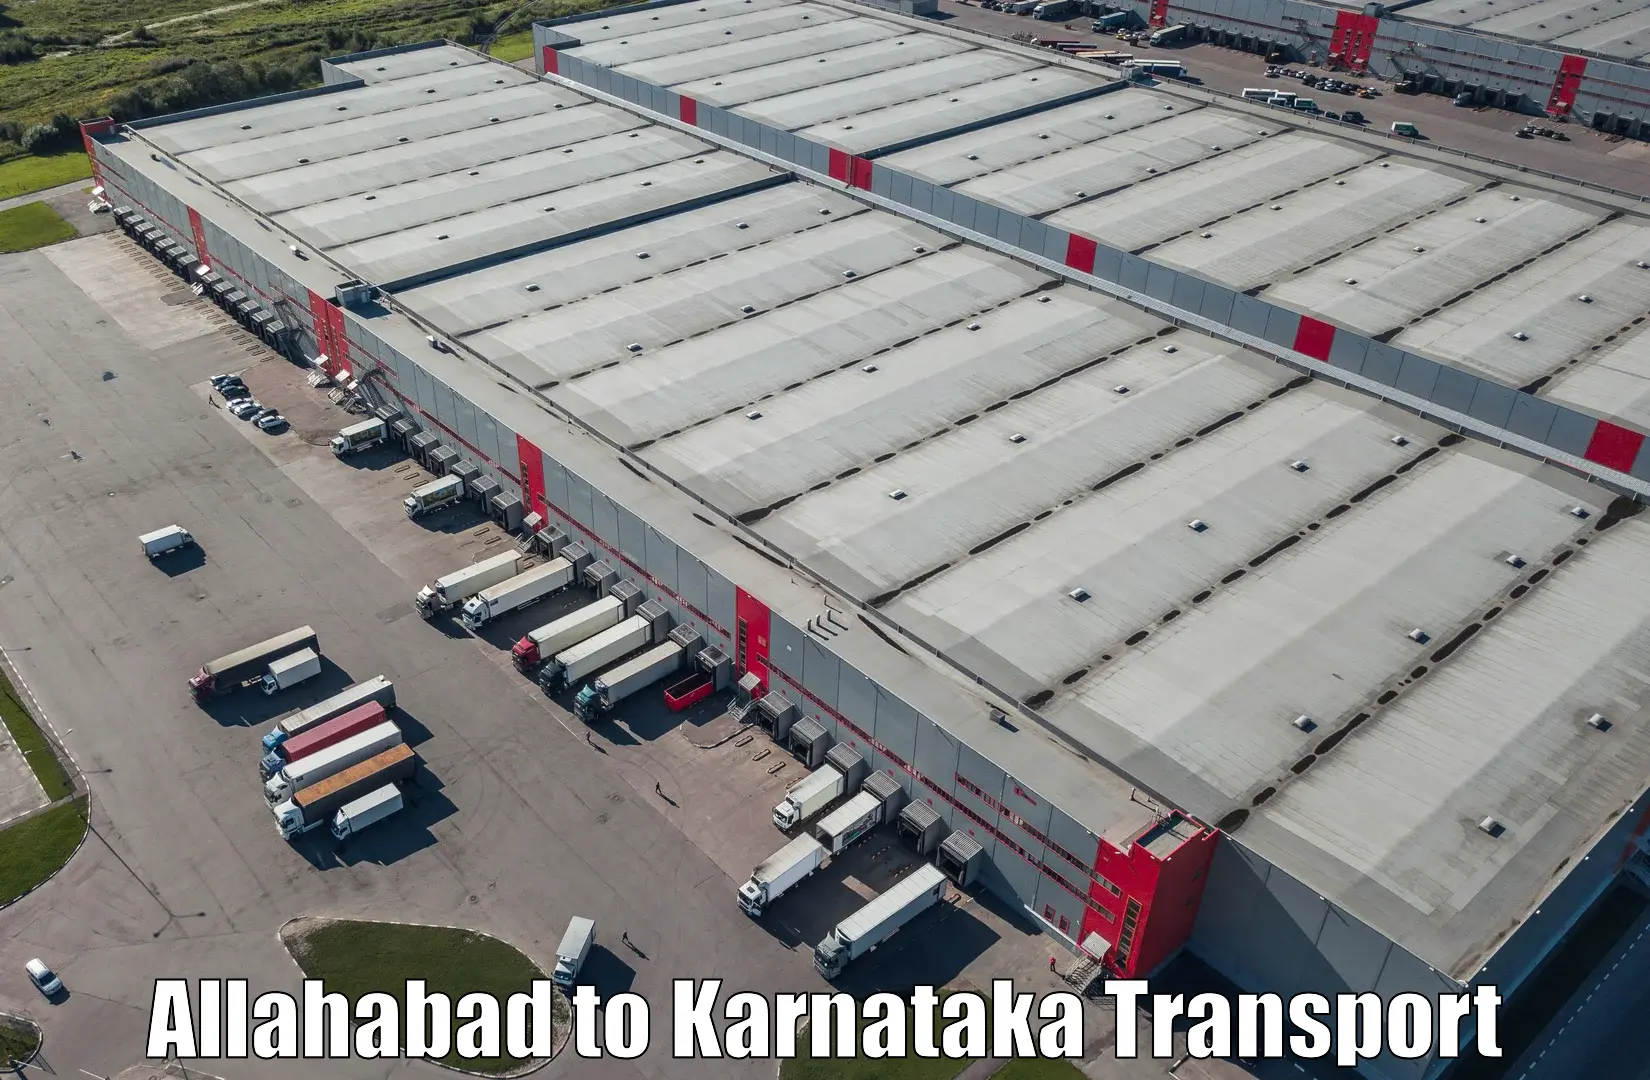 Truck transport companies in India Allahabad to Yellapur